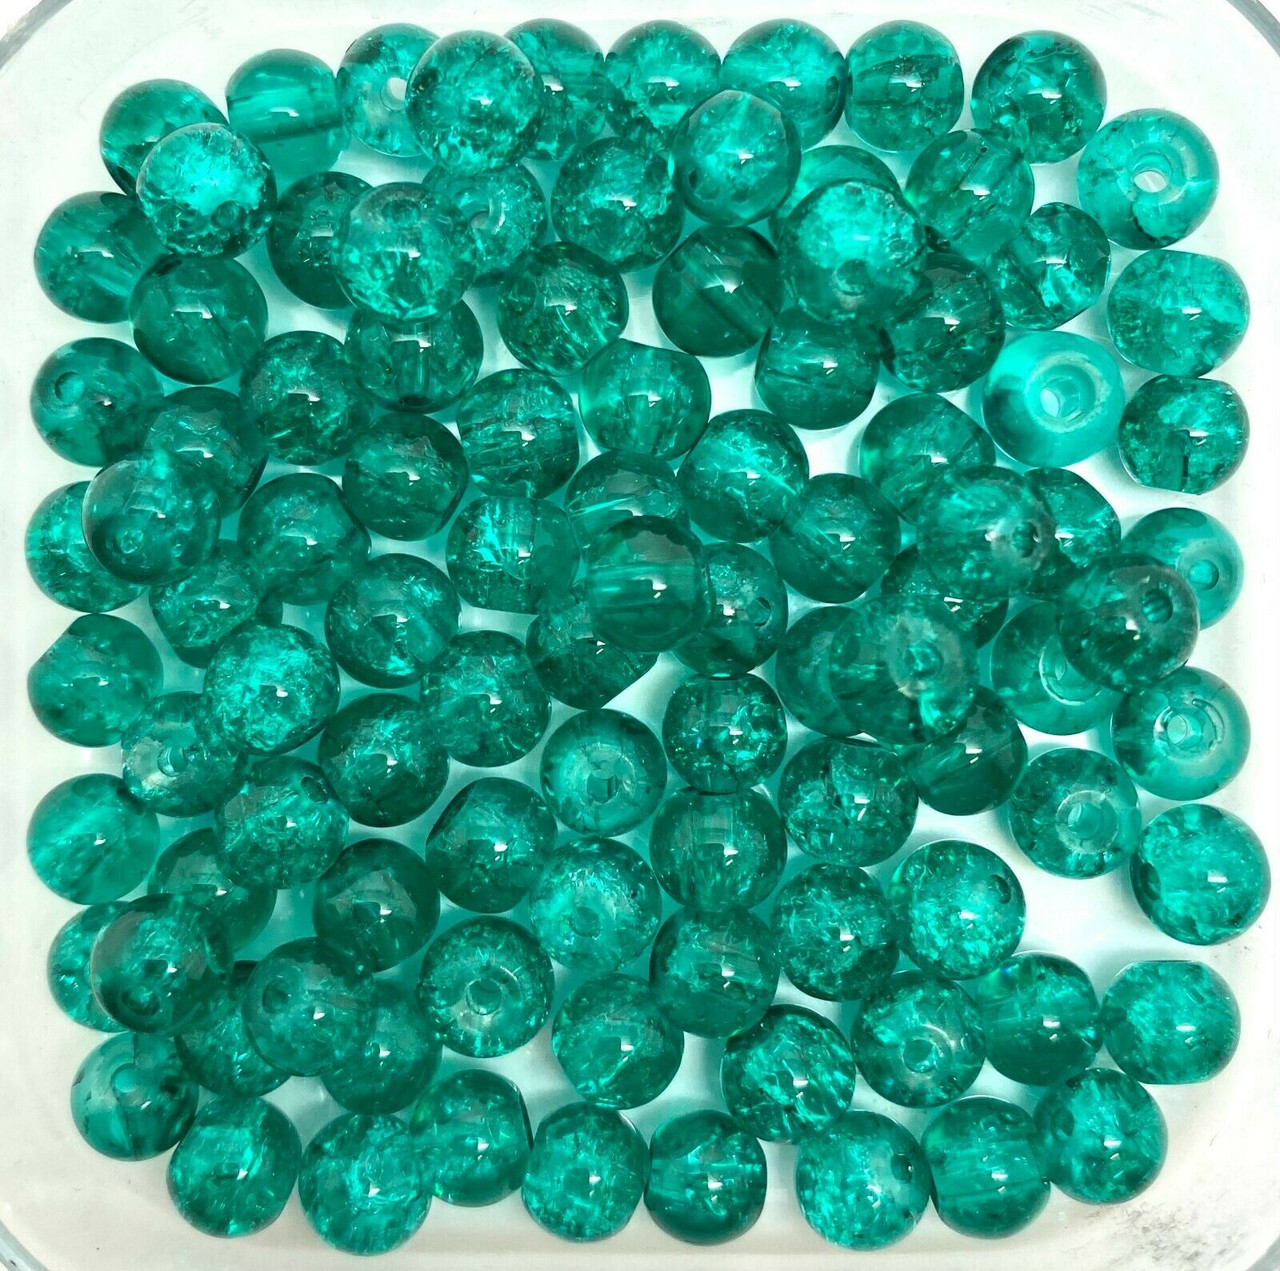 10mm Crackle Glass Beads - Sea Green, 40 beads